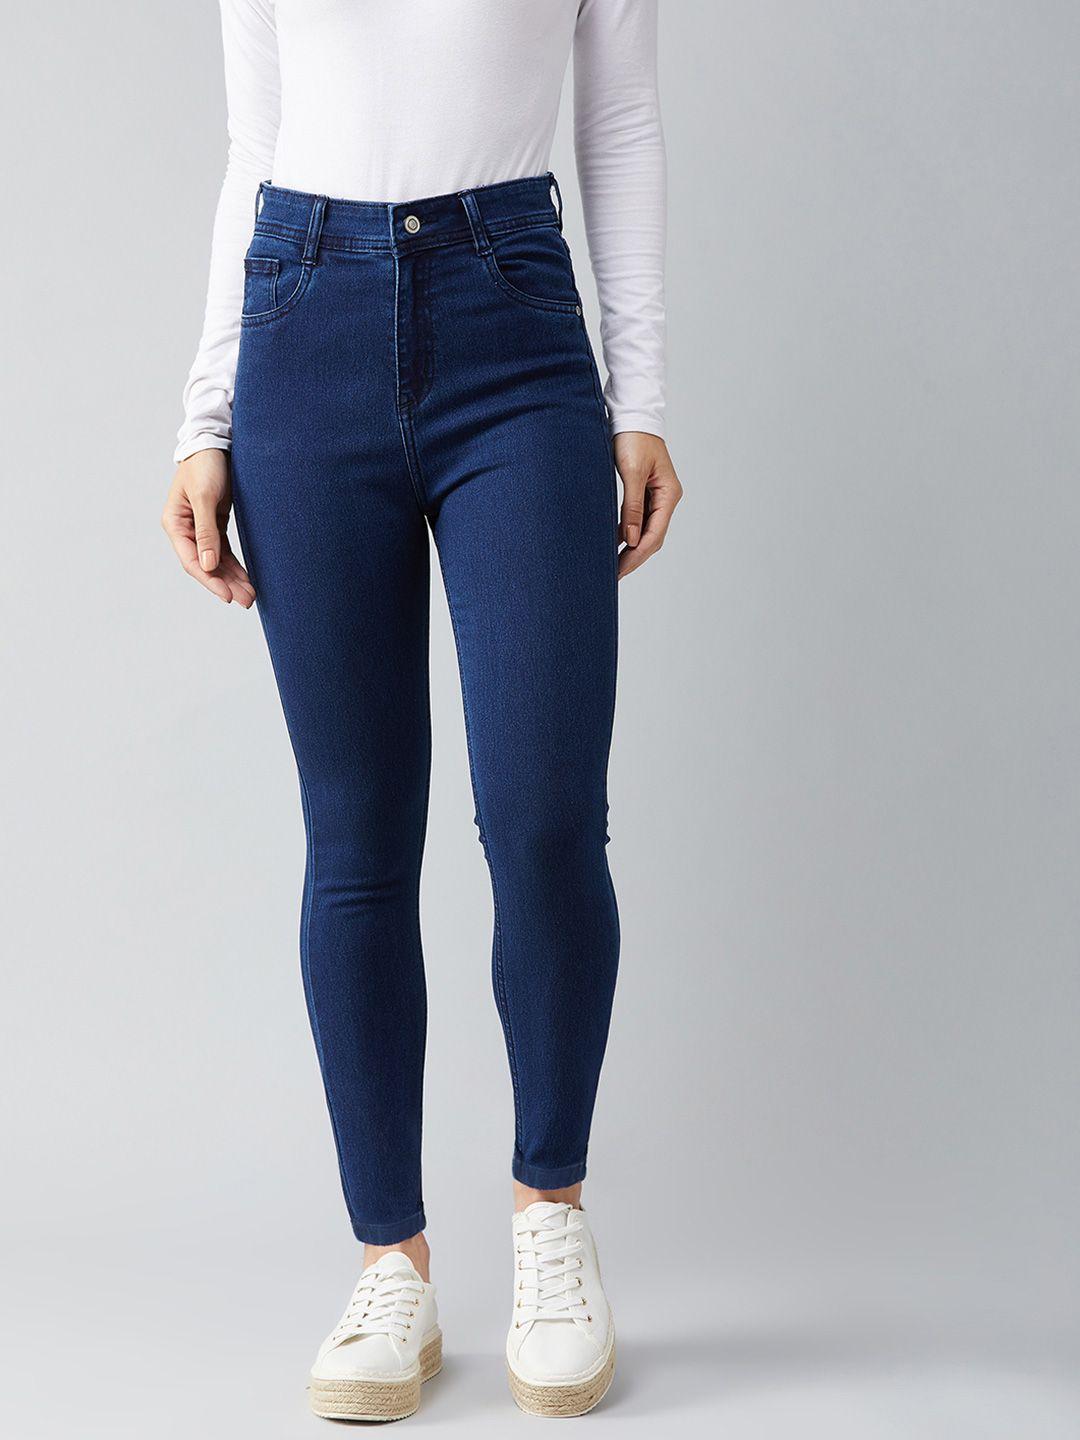 DOLCE CRUDO Navy Blue Skinny Fit High-Rise Stretchable Jeans